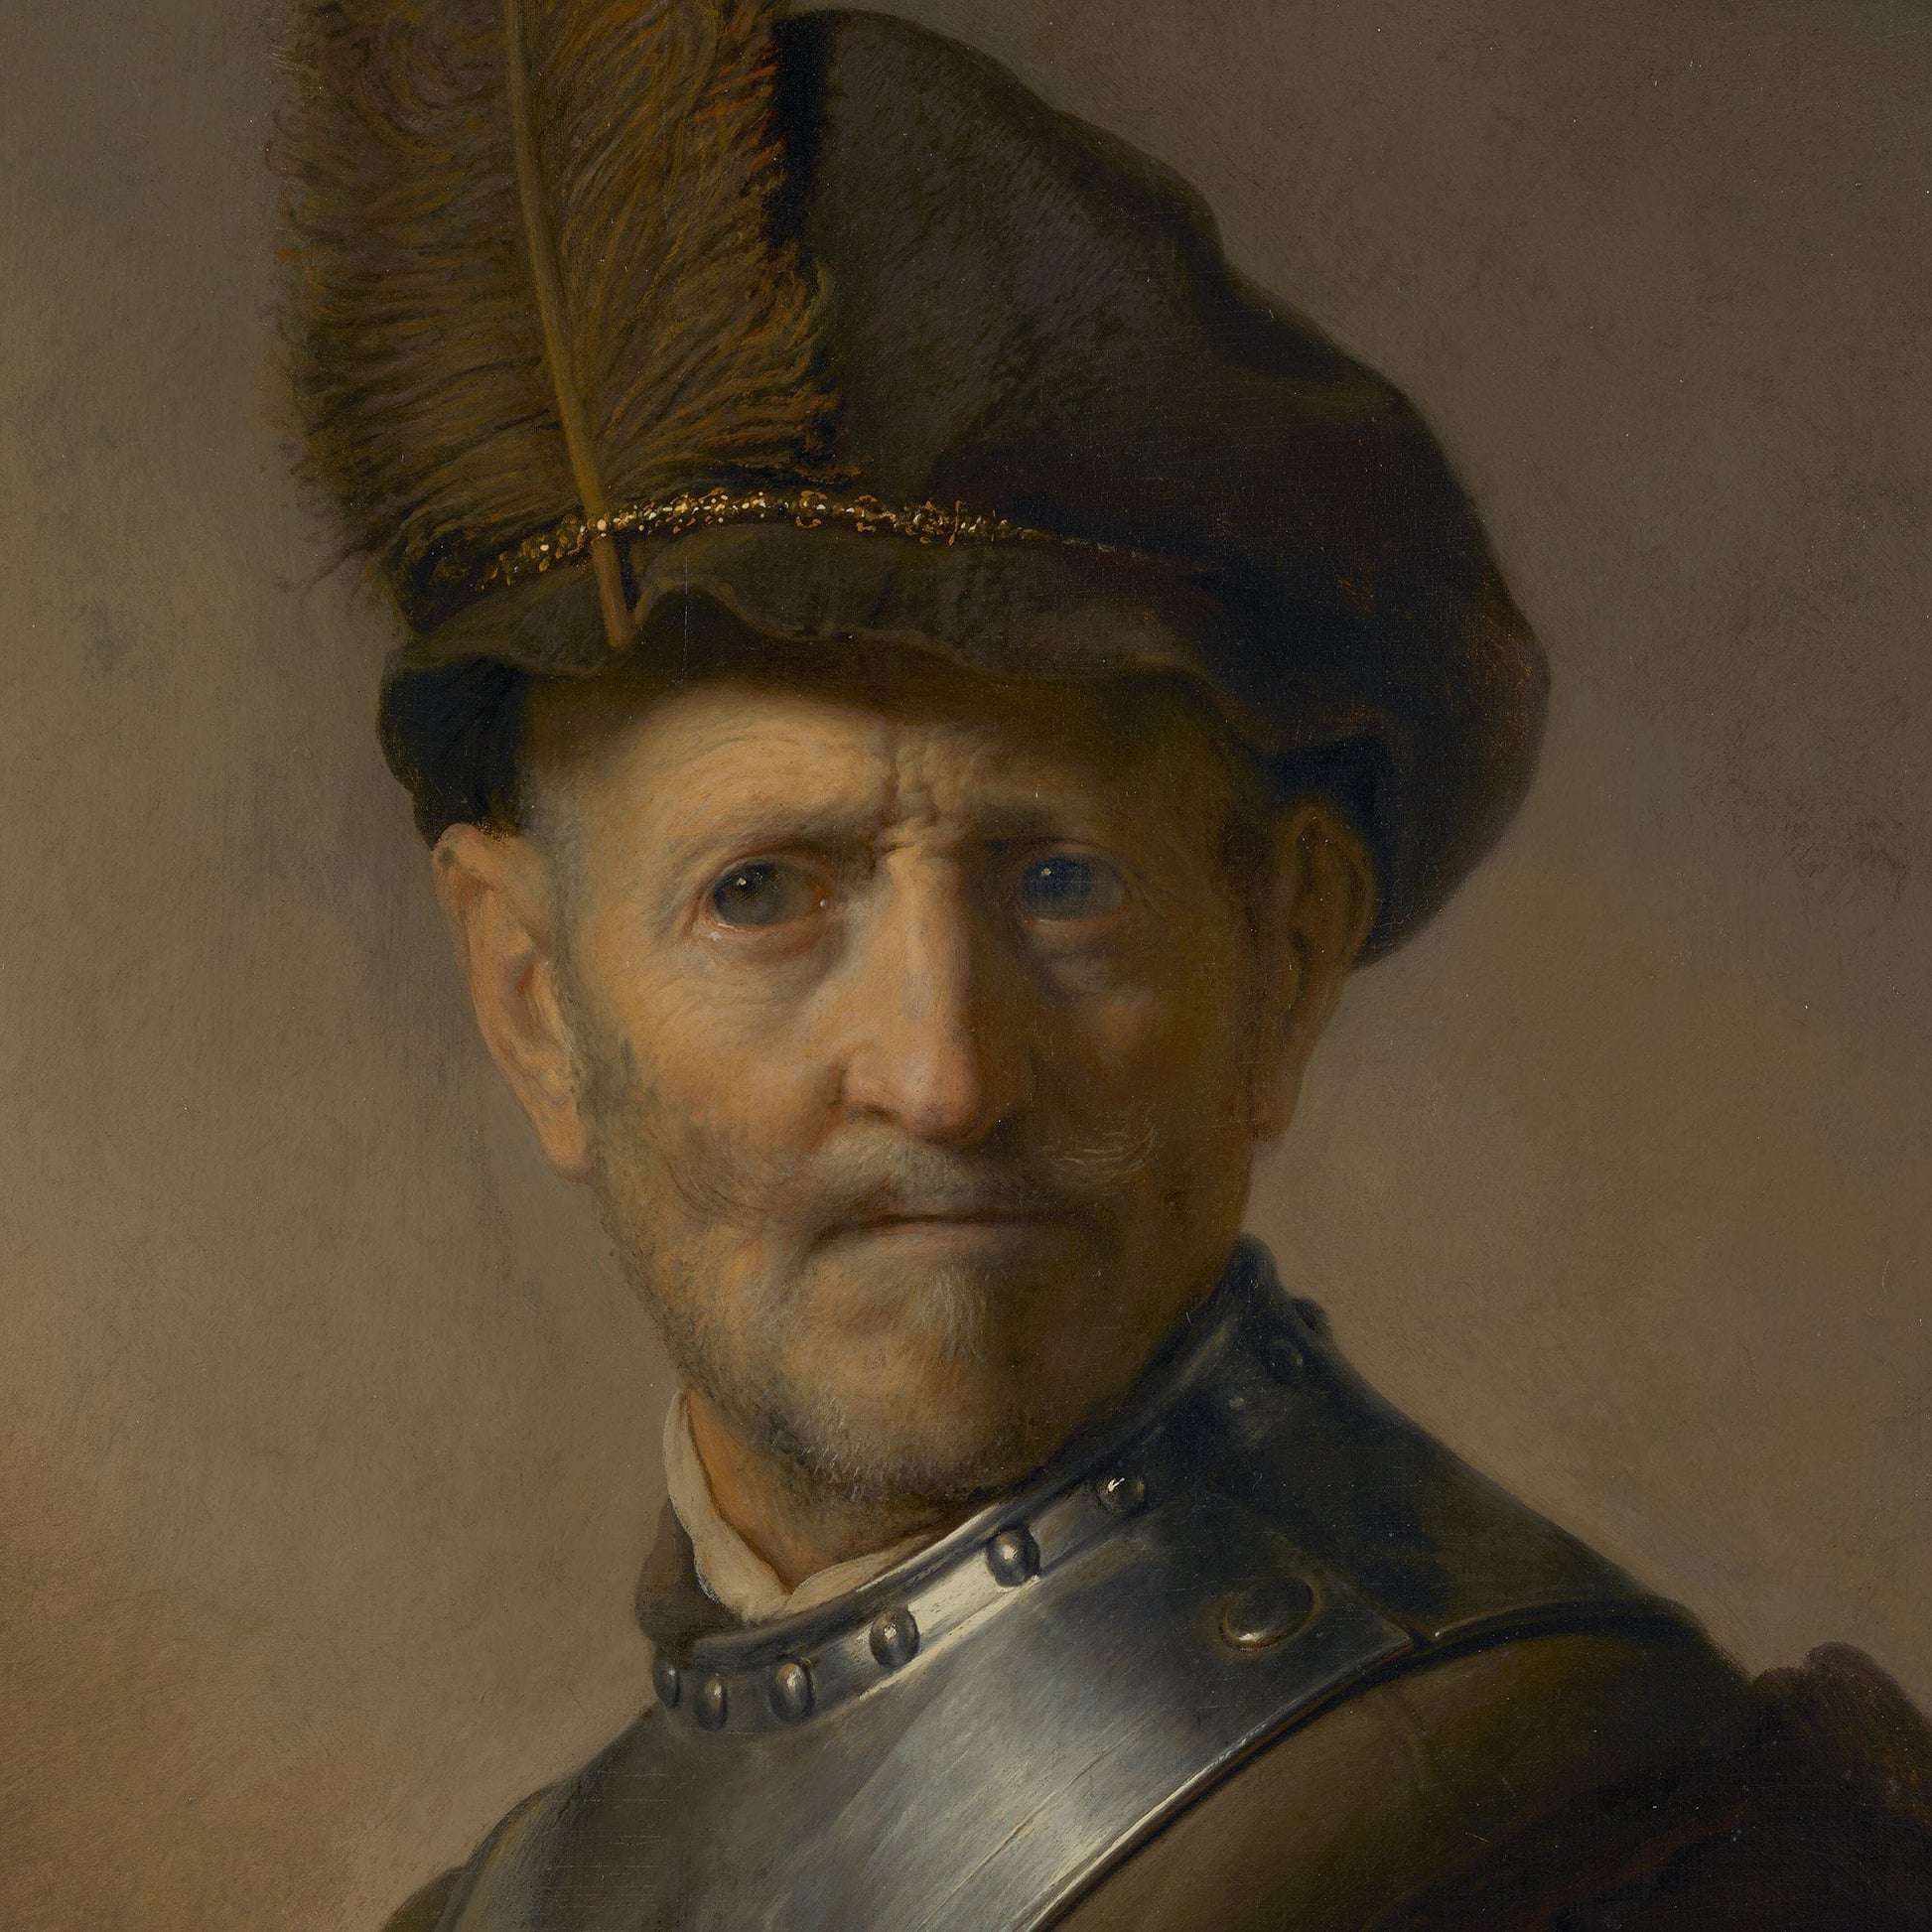 An Old Man in Military Costume by Rembrandt, 3d Printed with texture and brush strokes looks like original oil-painting, code:479